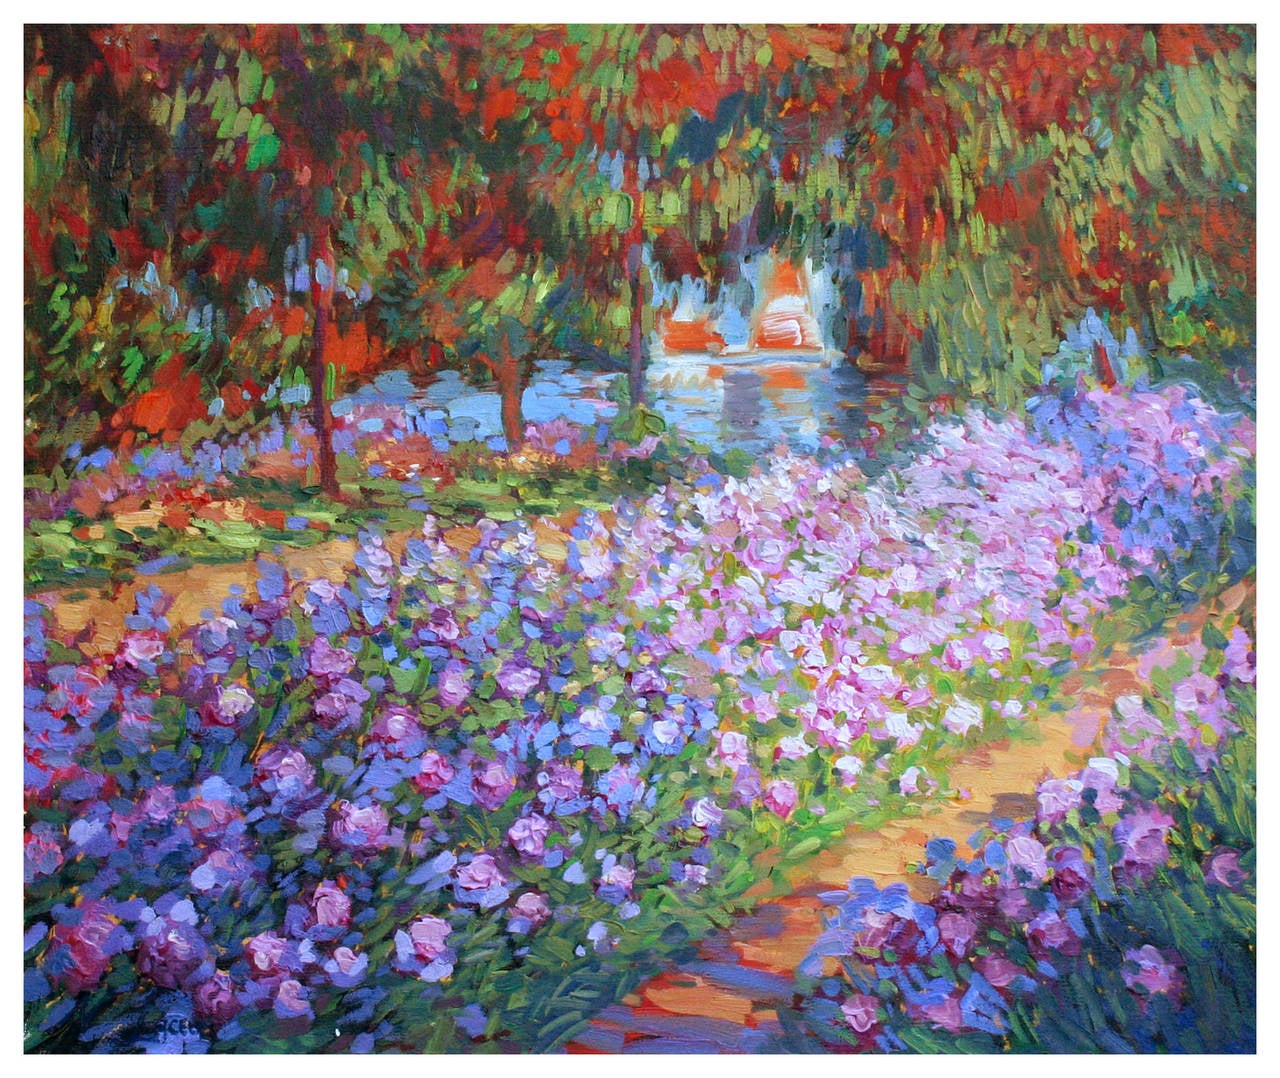 Garden at the Lakeside - Painting by Nicole Laceur